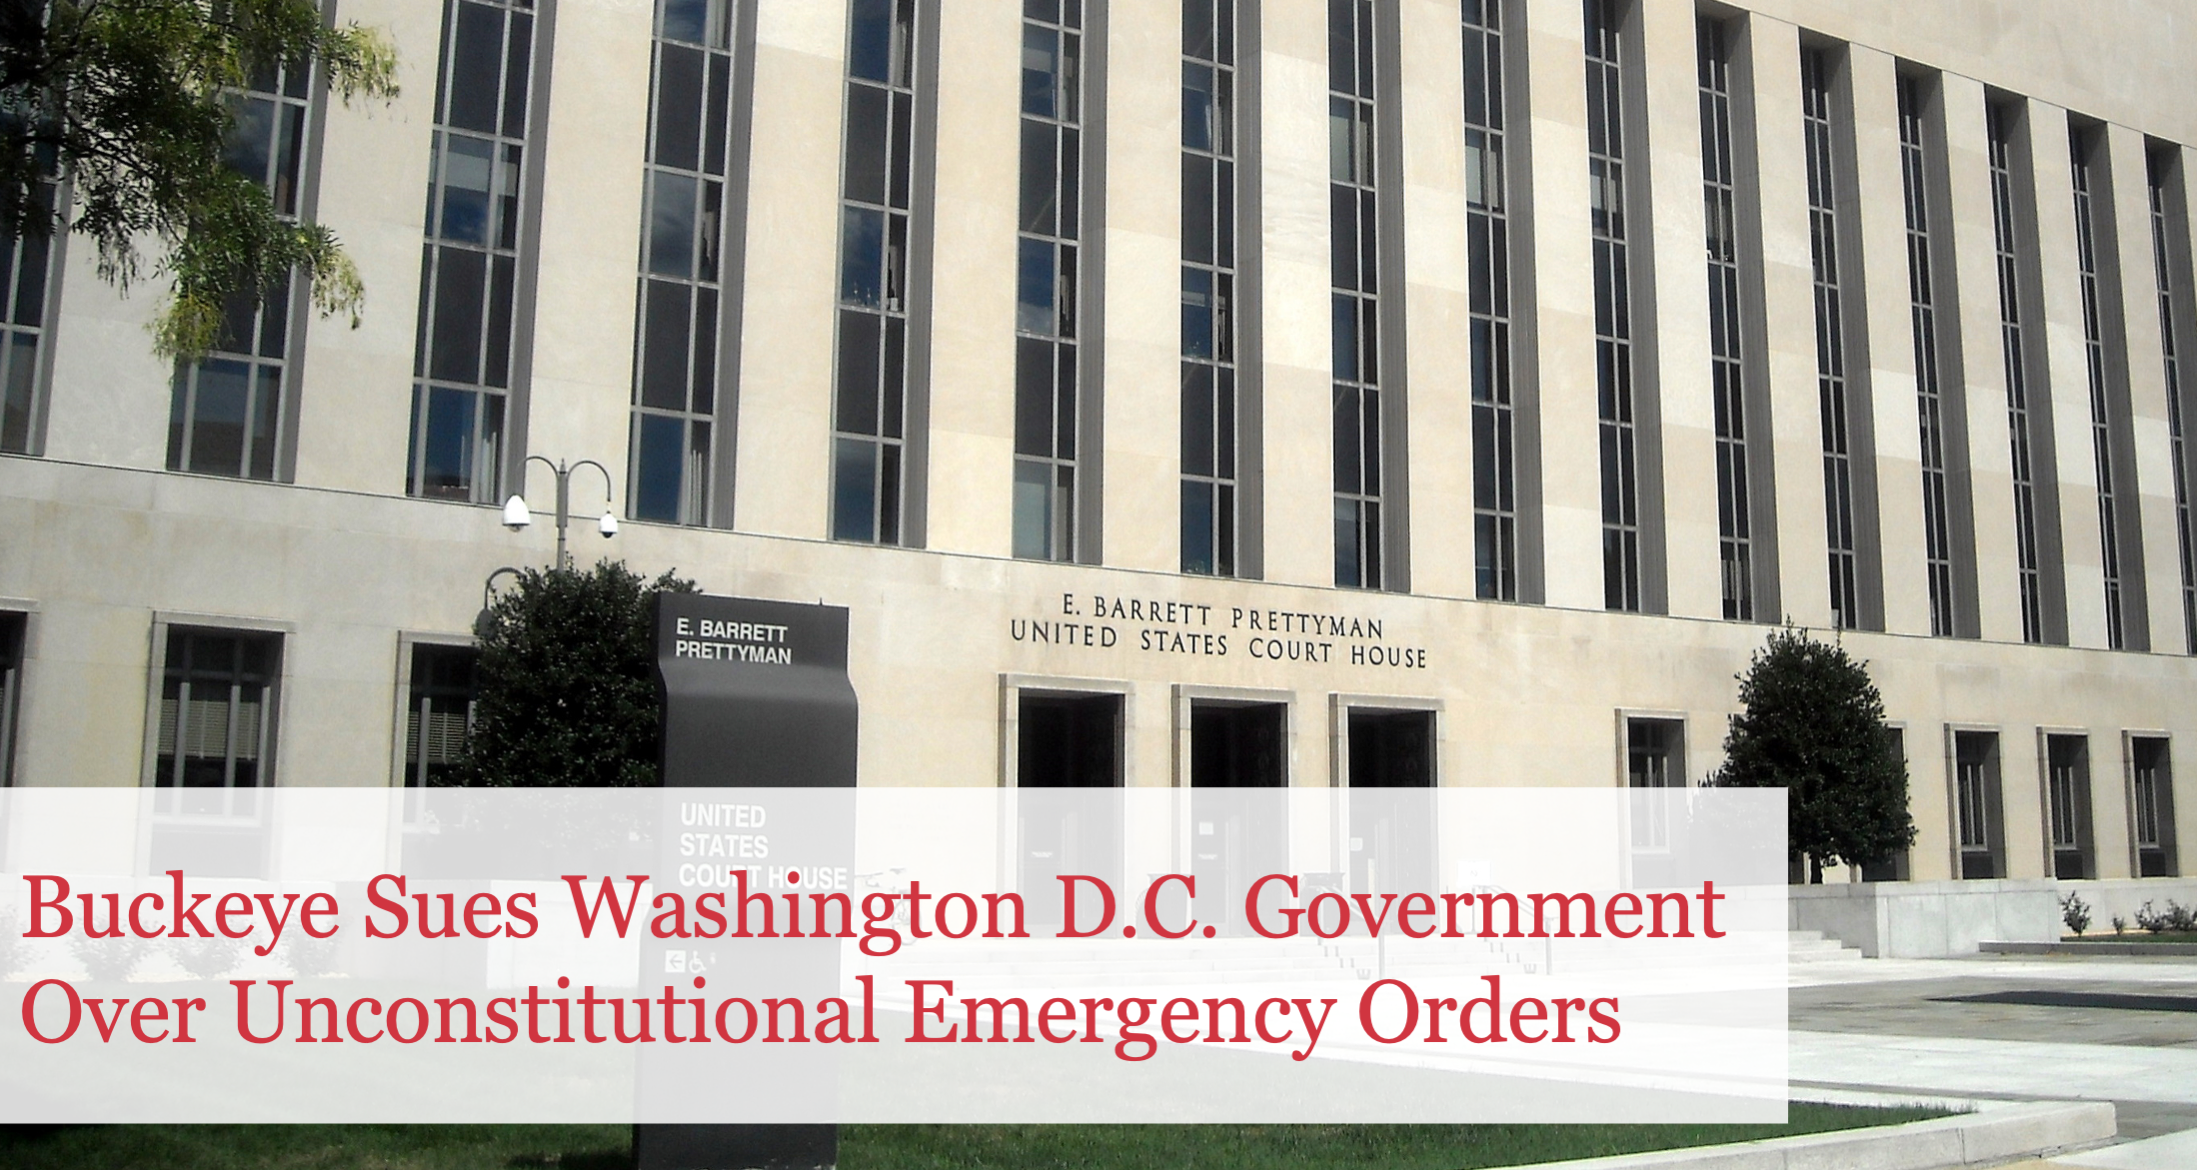 The Buckeye Institute Sues Washington D.C. Government Over Unconstitutional Emergency Orders